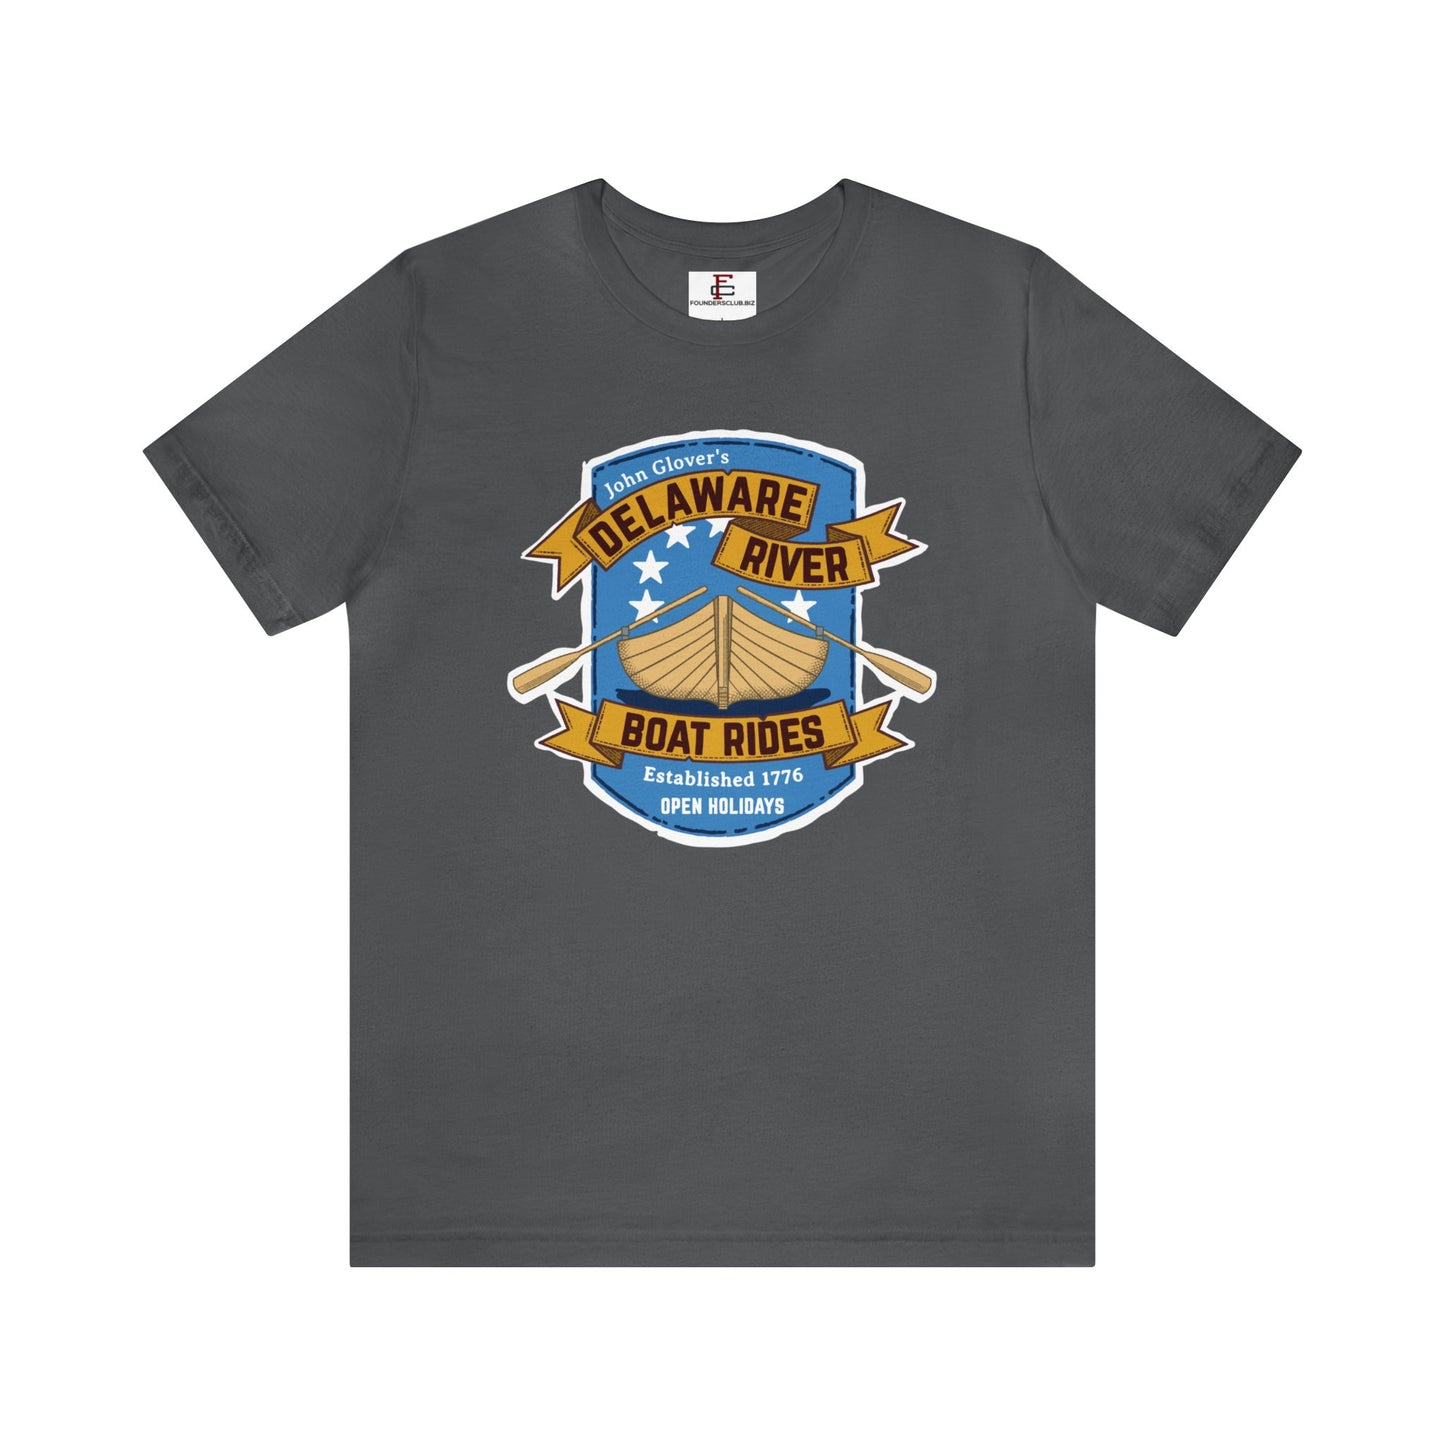 John Glover Delaware River Boat Rides Tee (One Sided)